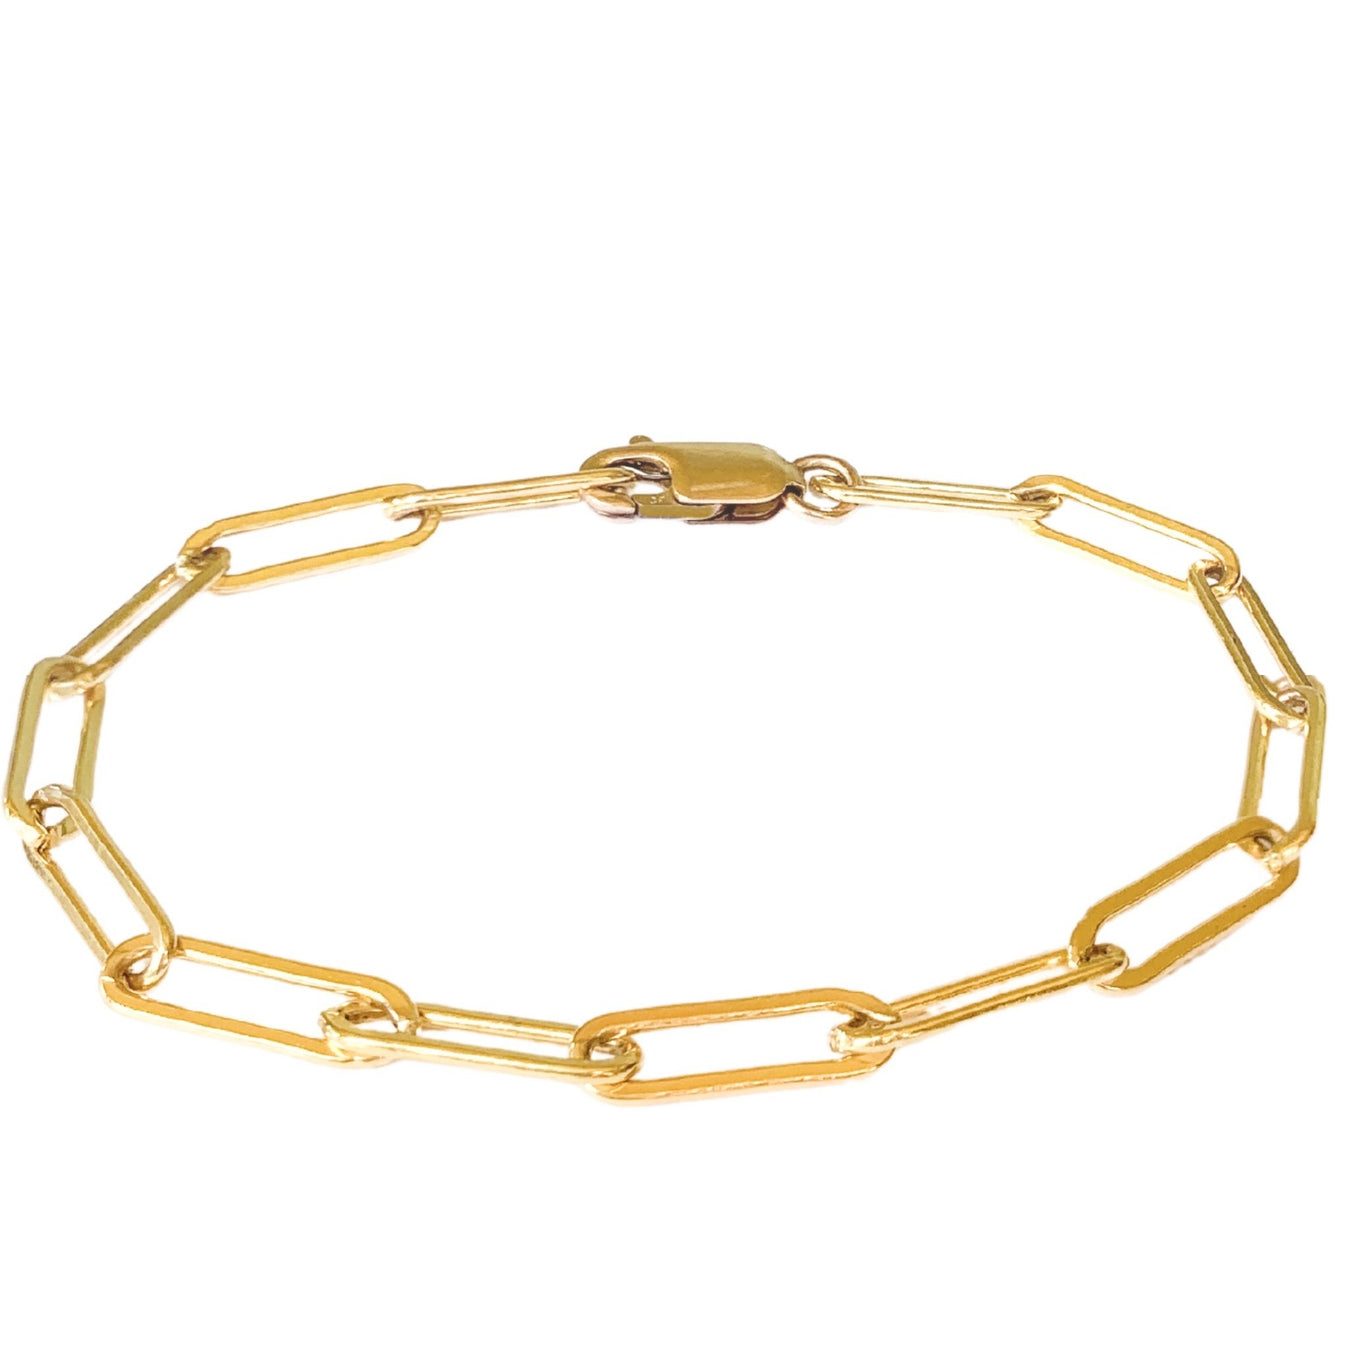 Gold Paperclip Chain - Blooming Lotus Jewelry